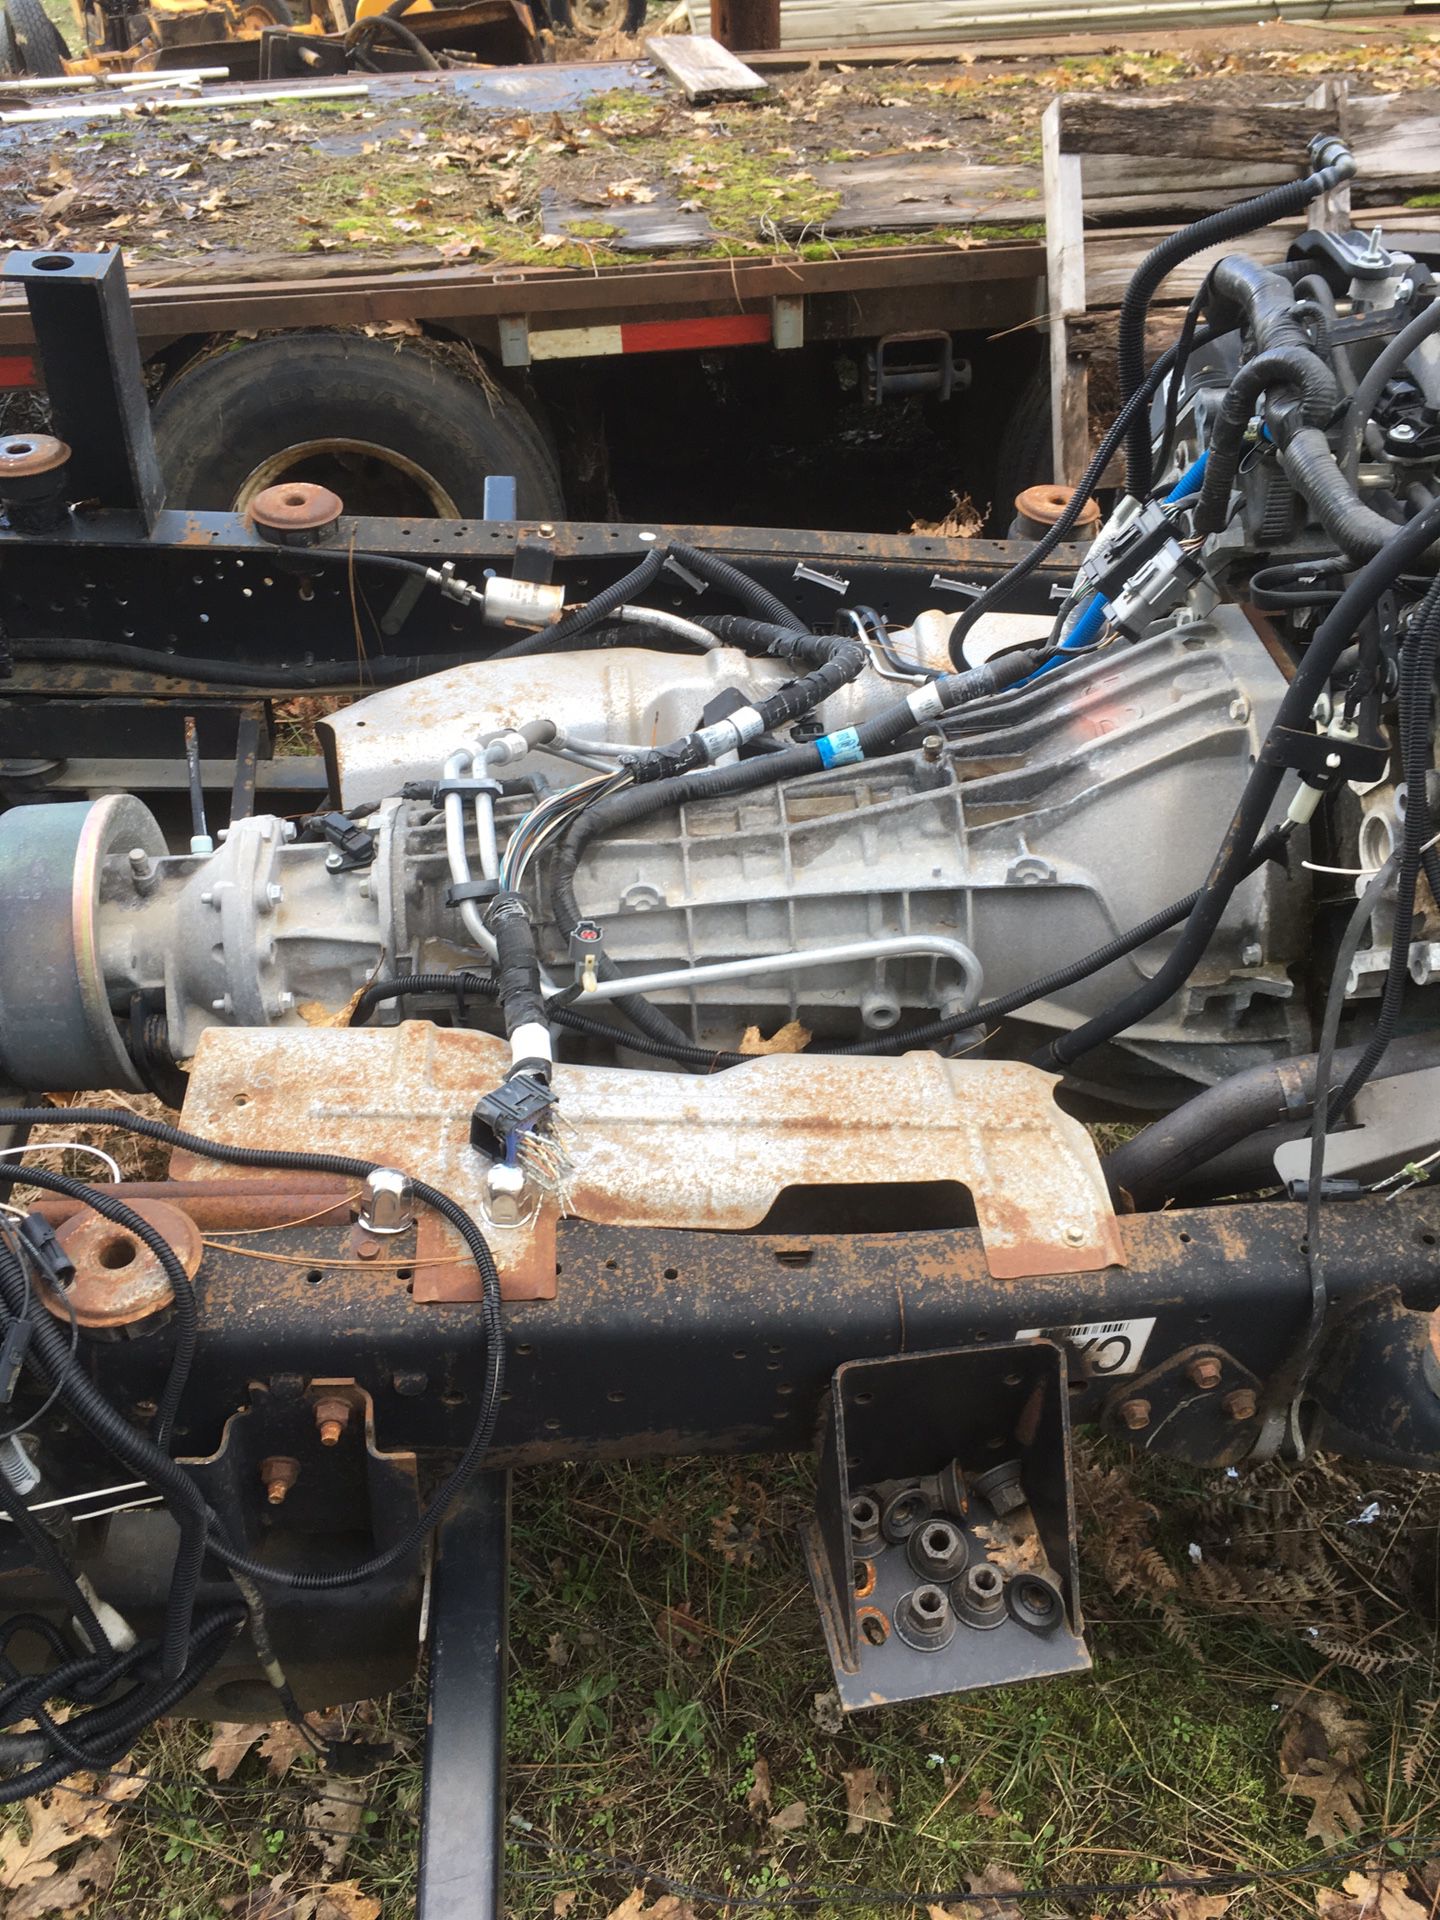 2004 E450 PARTS! Motor, trans, axels and frame, really good condition